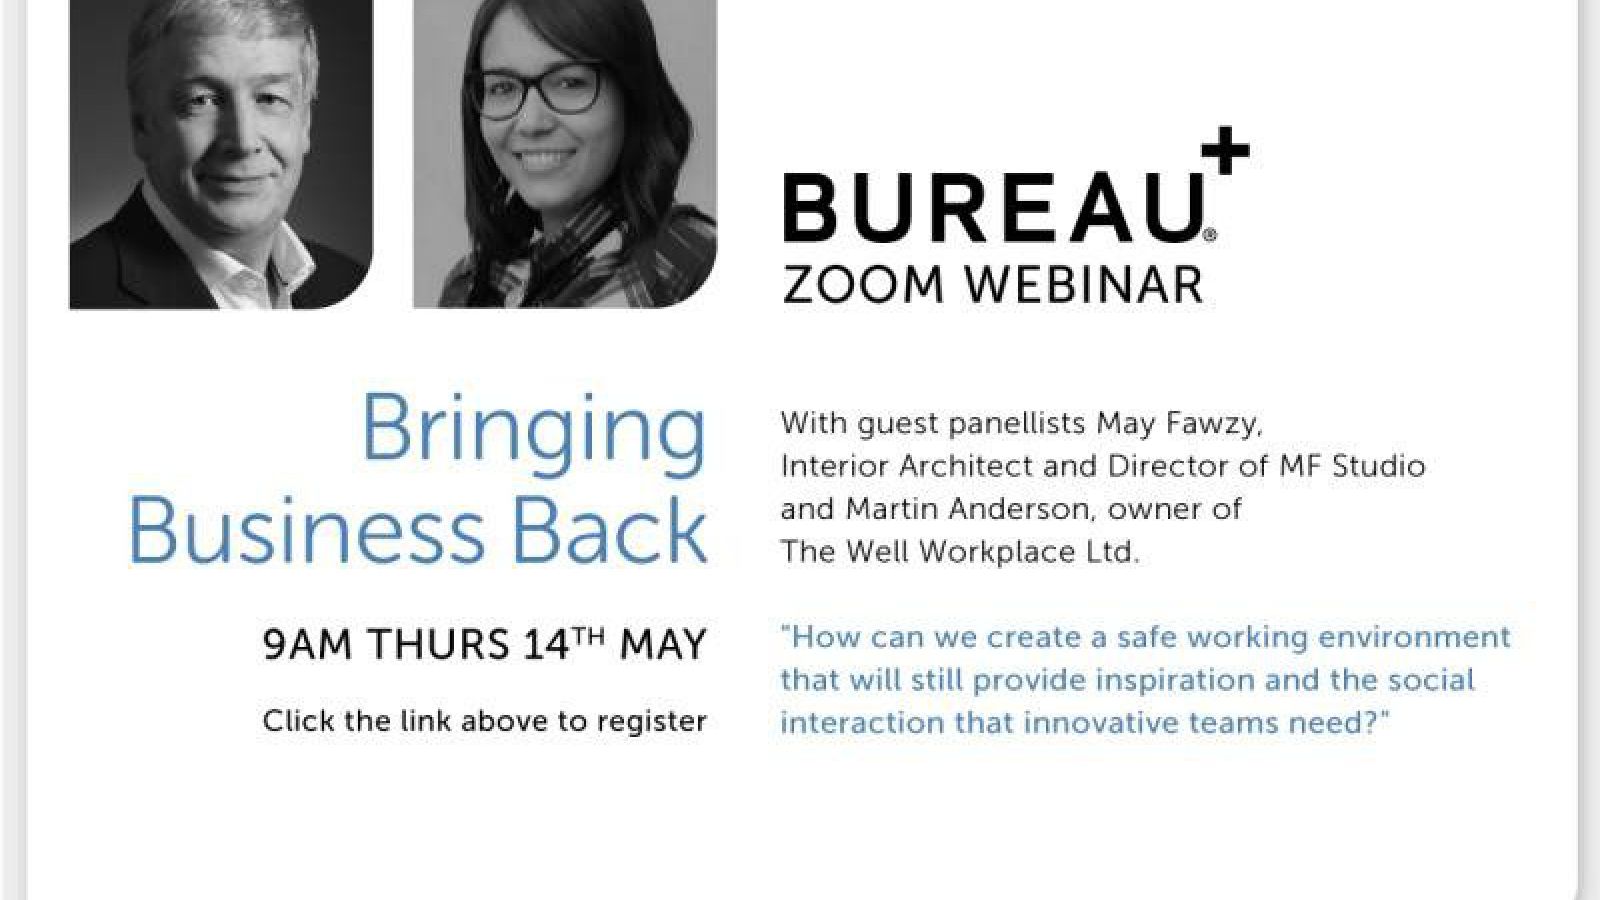 Back to the 2020 Workplace Webinar image